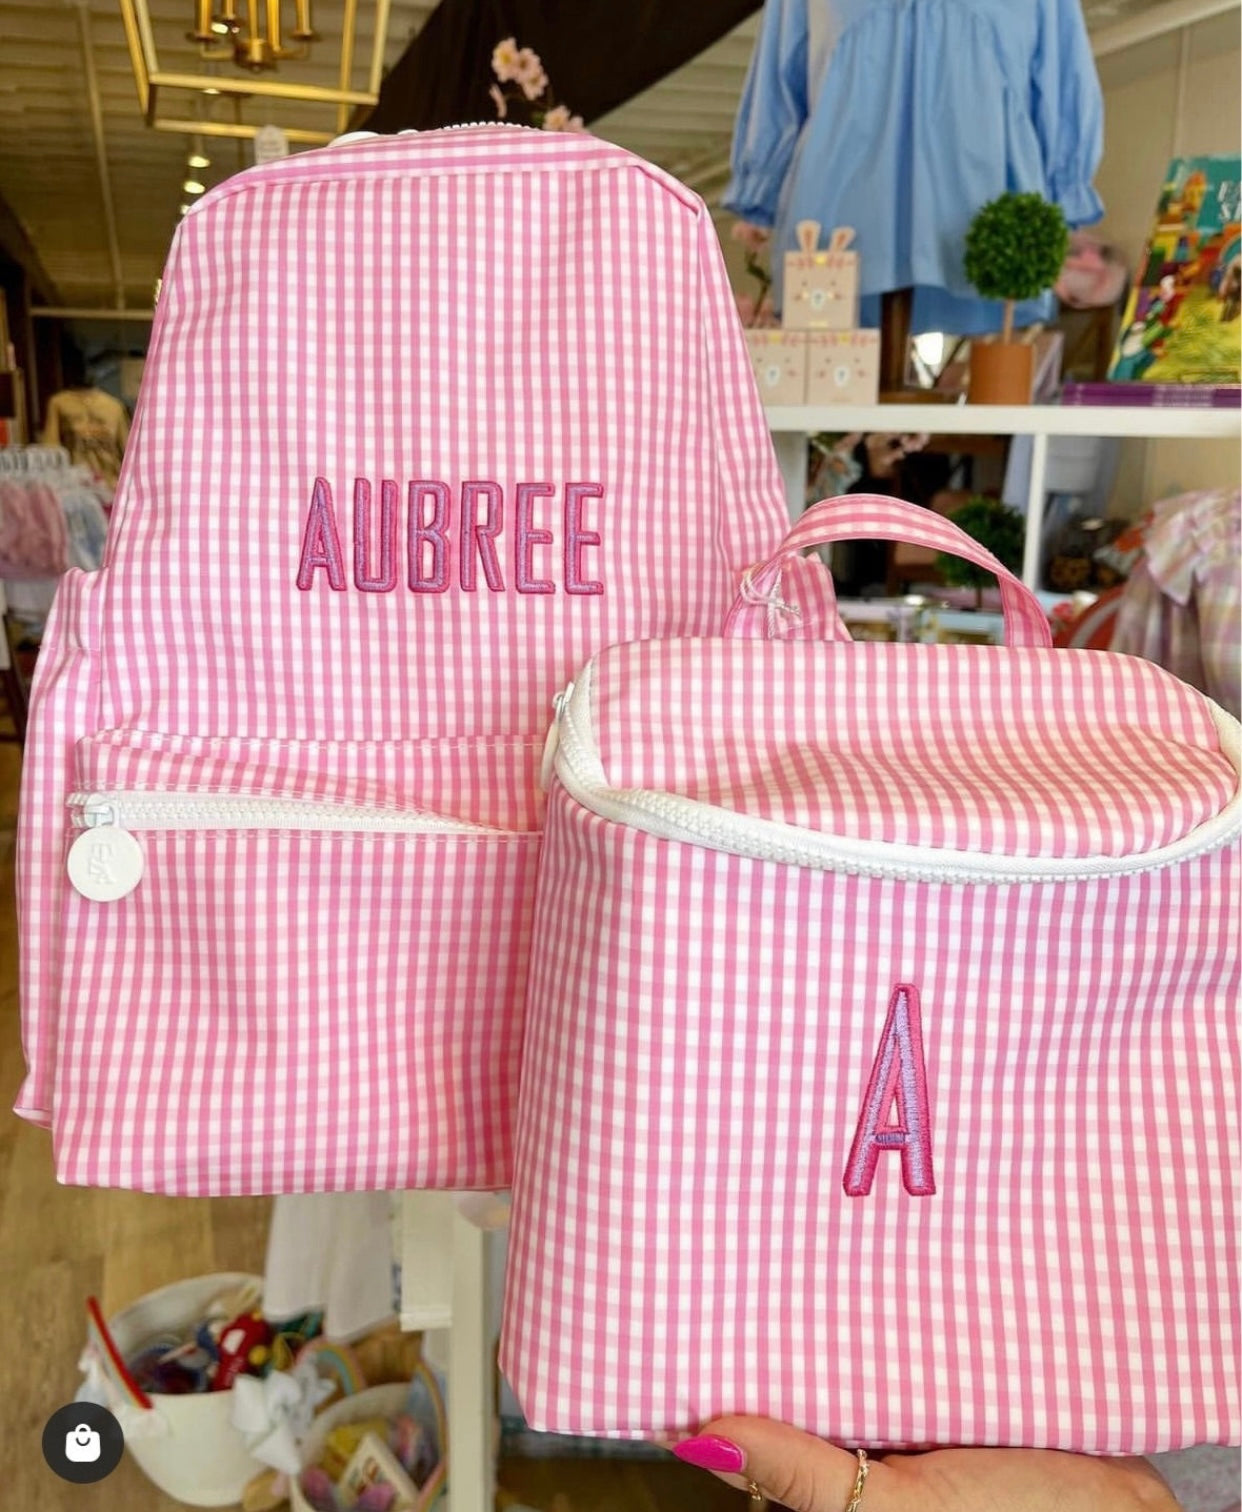 TAKEAWAY LUNCH TOTE - GINGHAM TAFFY